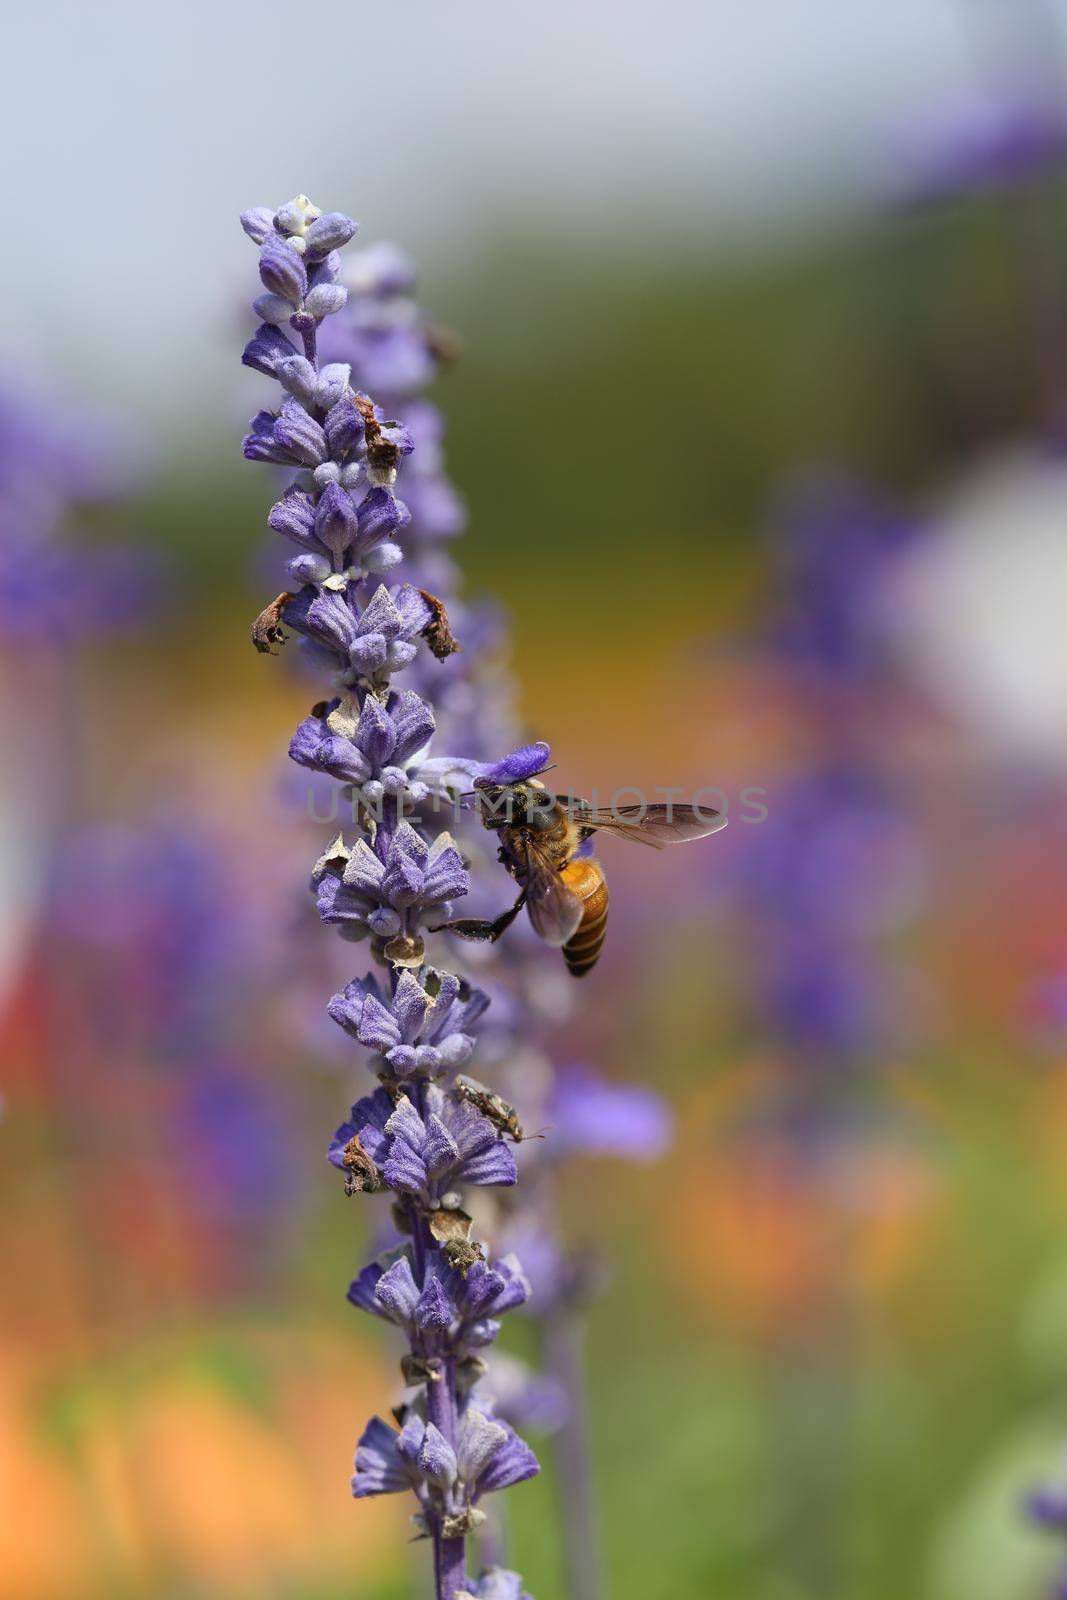 Lavender flower with bee in the garden